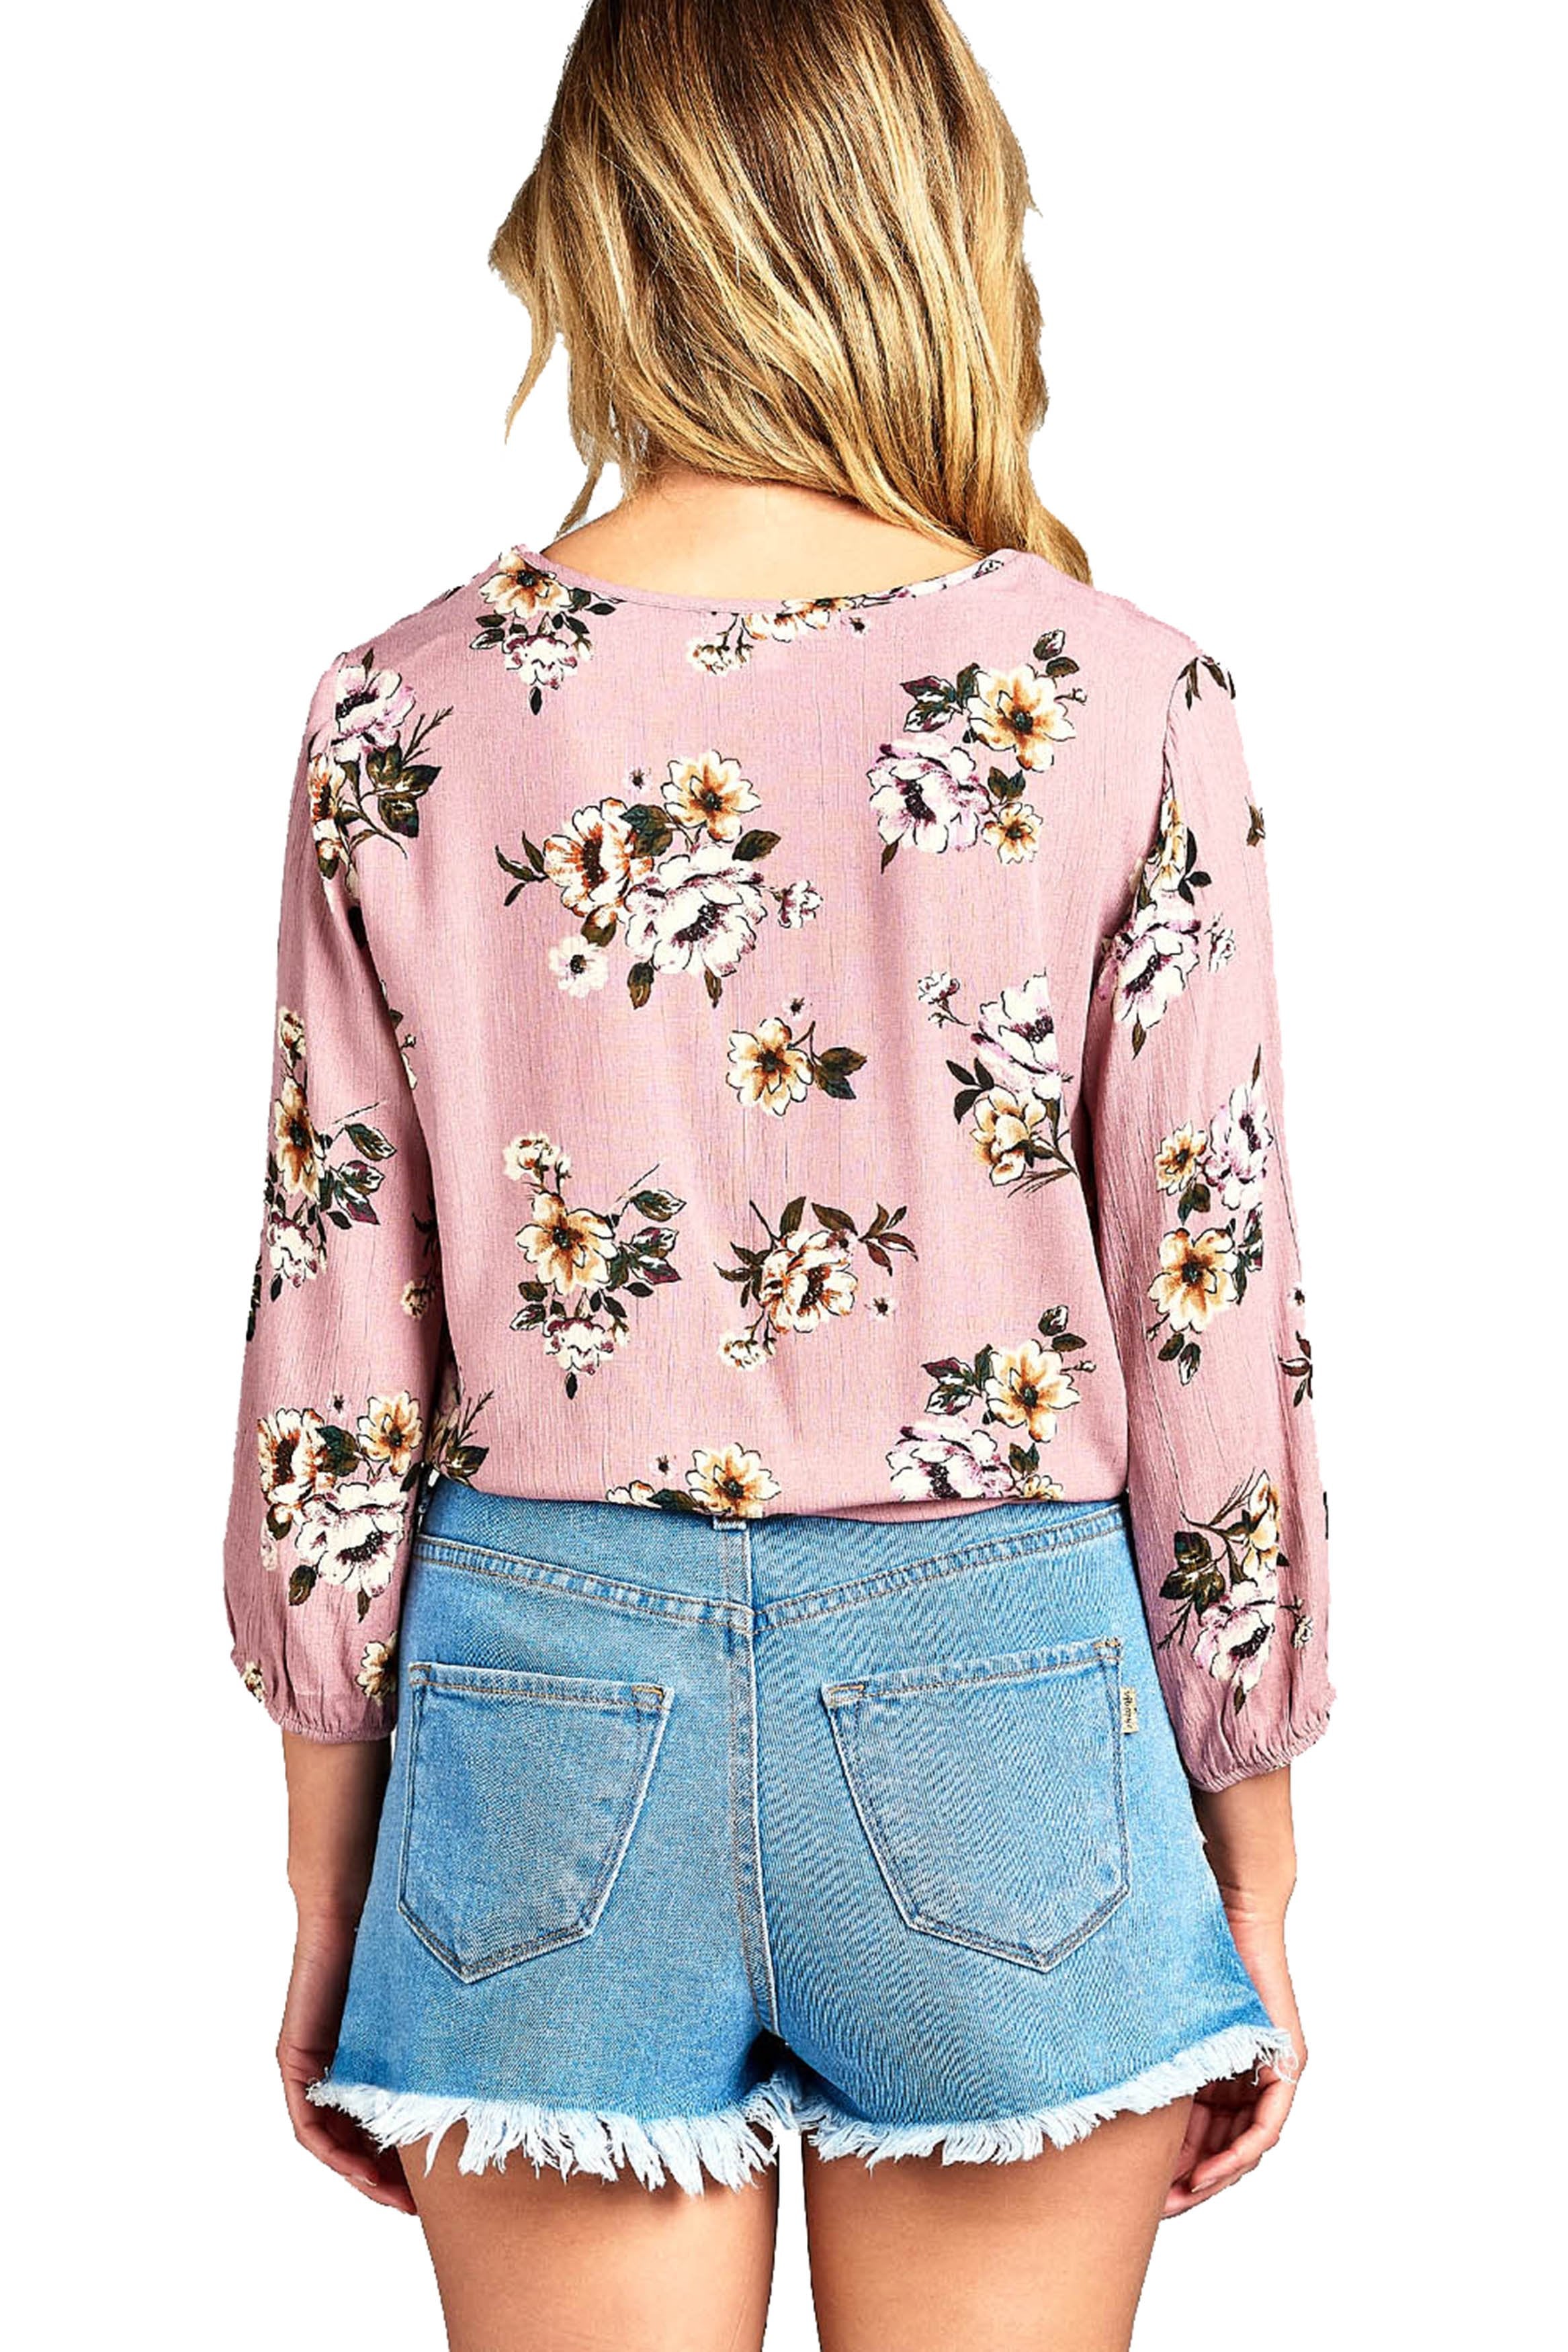 Long Sleeve Elasticized Cuffs Round Neck Semi Cropped Floral Print Front Self Tie Top